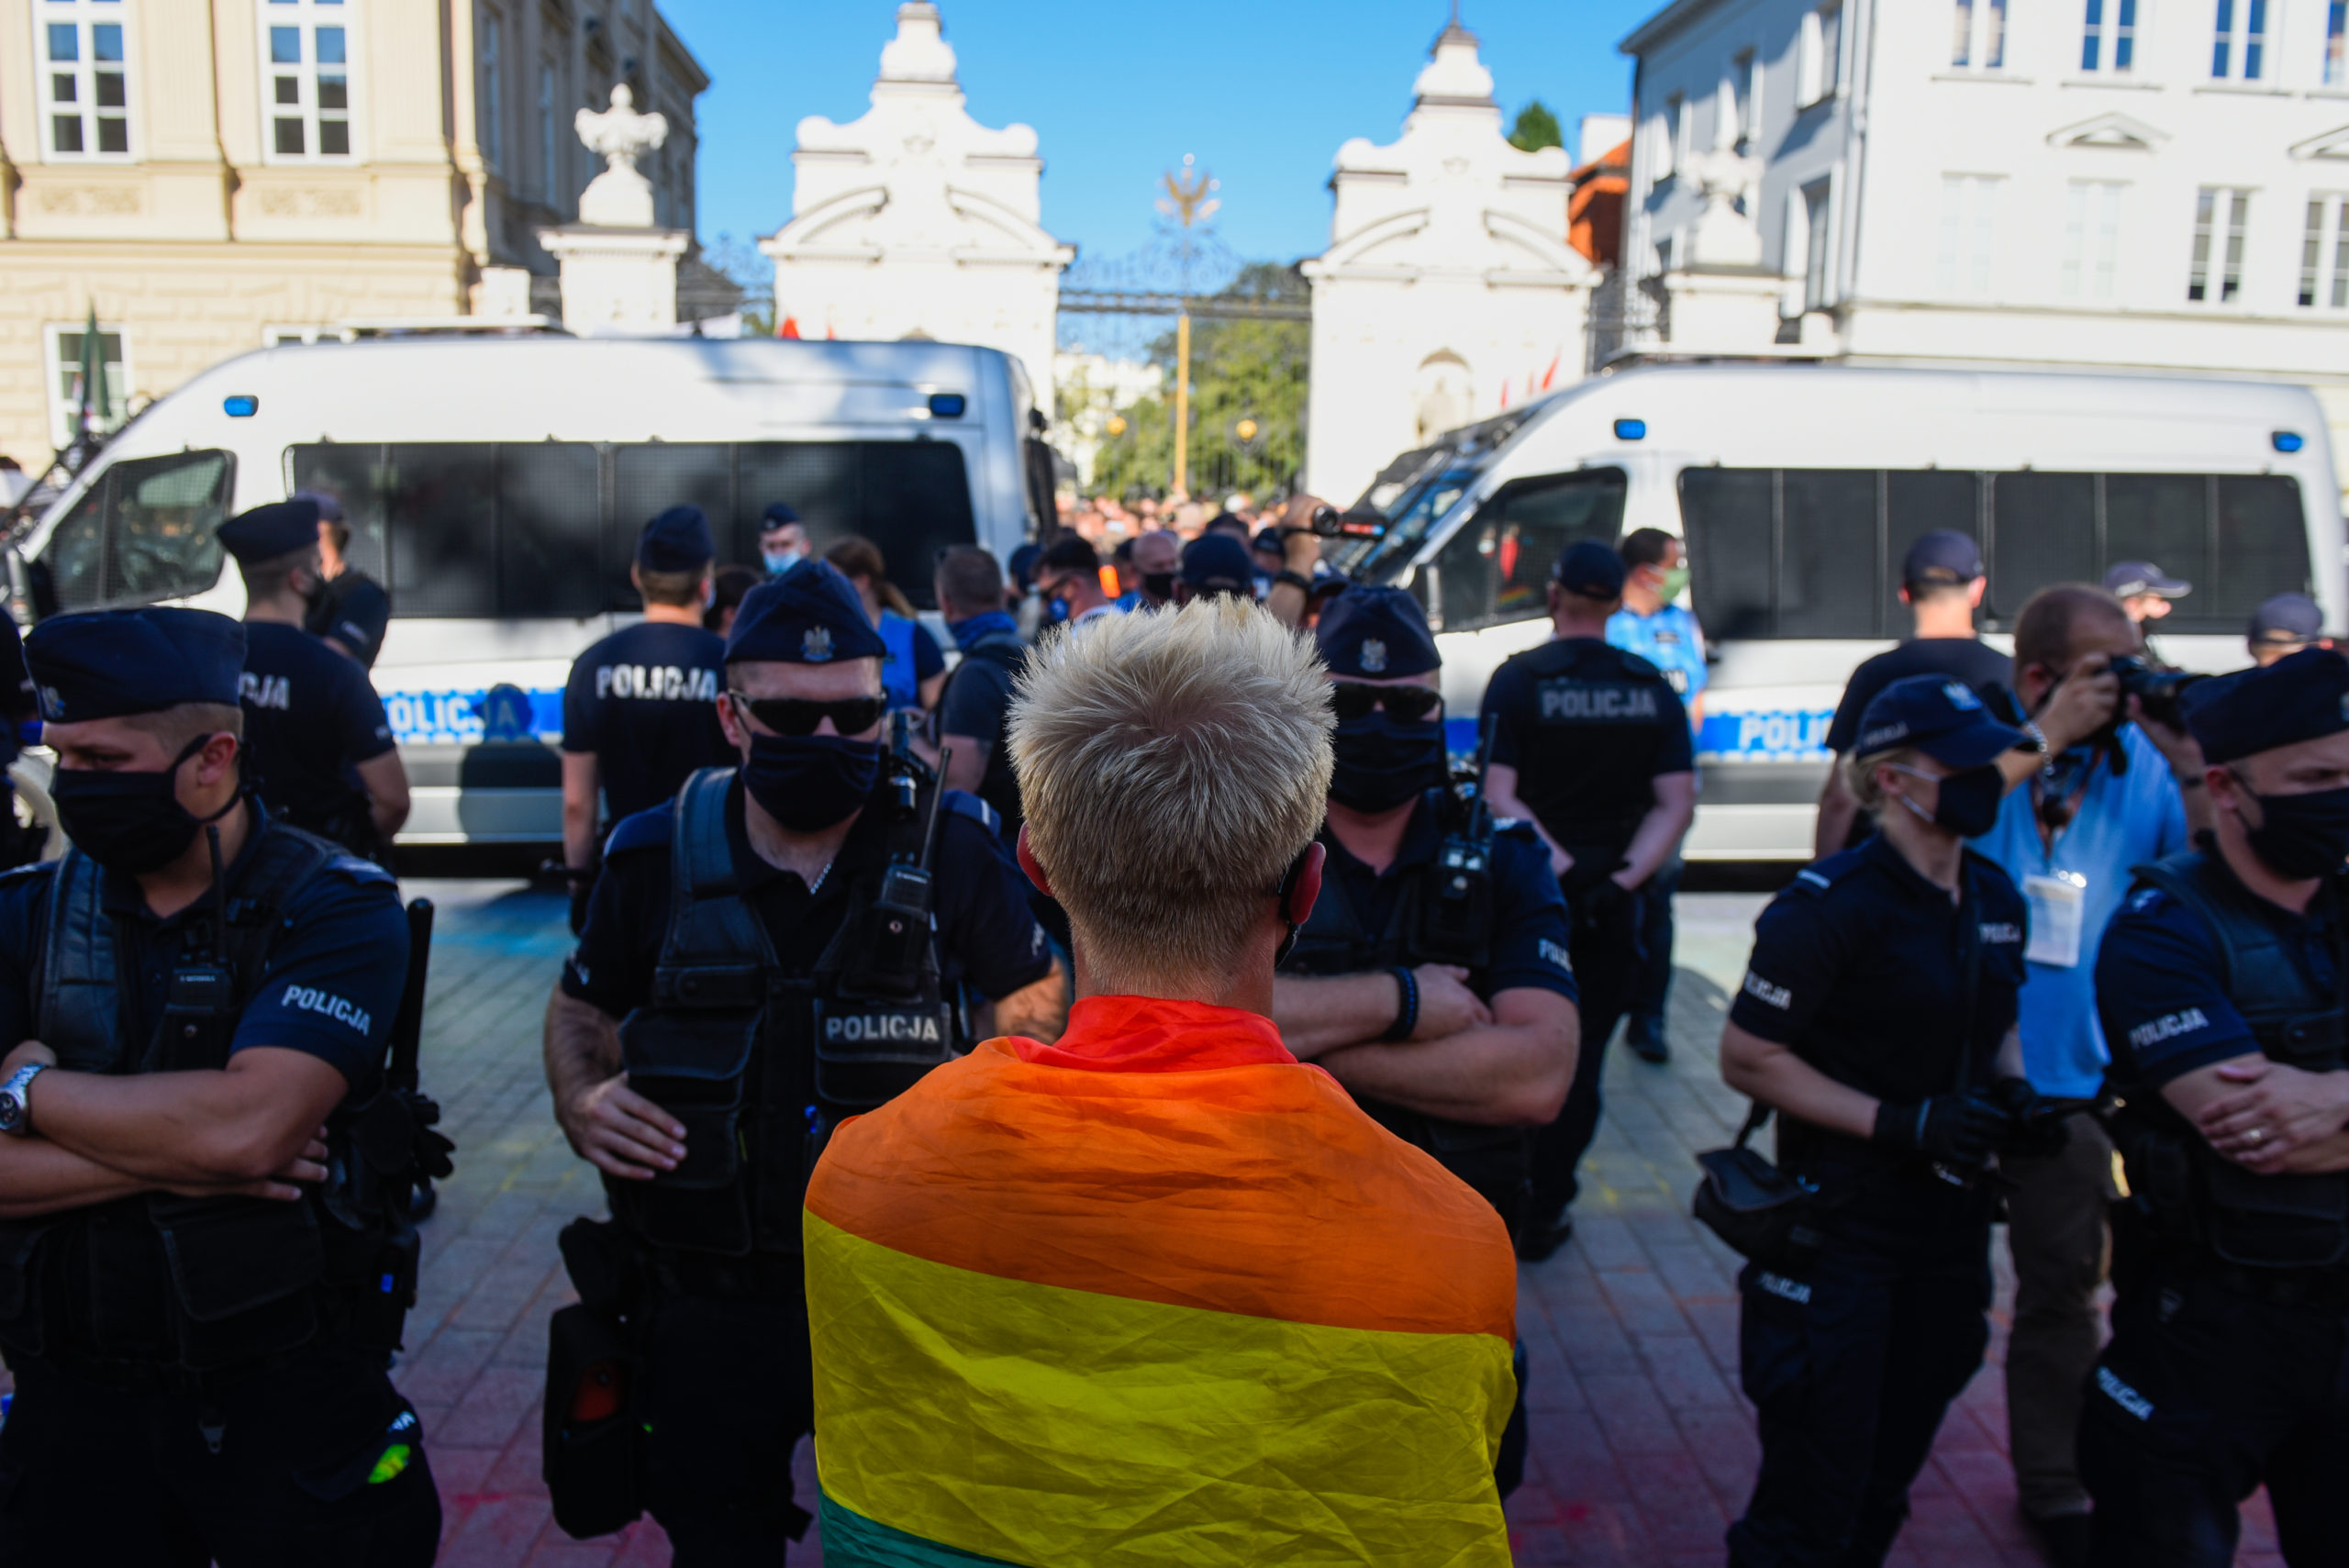 An LGBT activist wears a rainbow flag during a counter protest against an anti-LGBT far right rally on August 16, 2020 in Warsaw, Poland. 